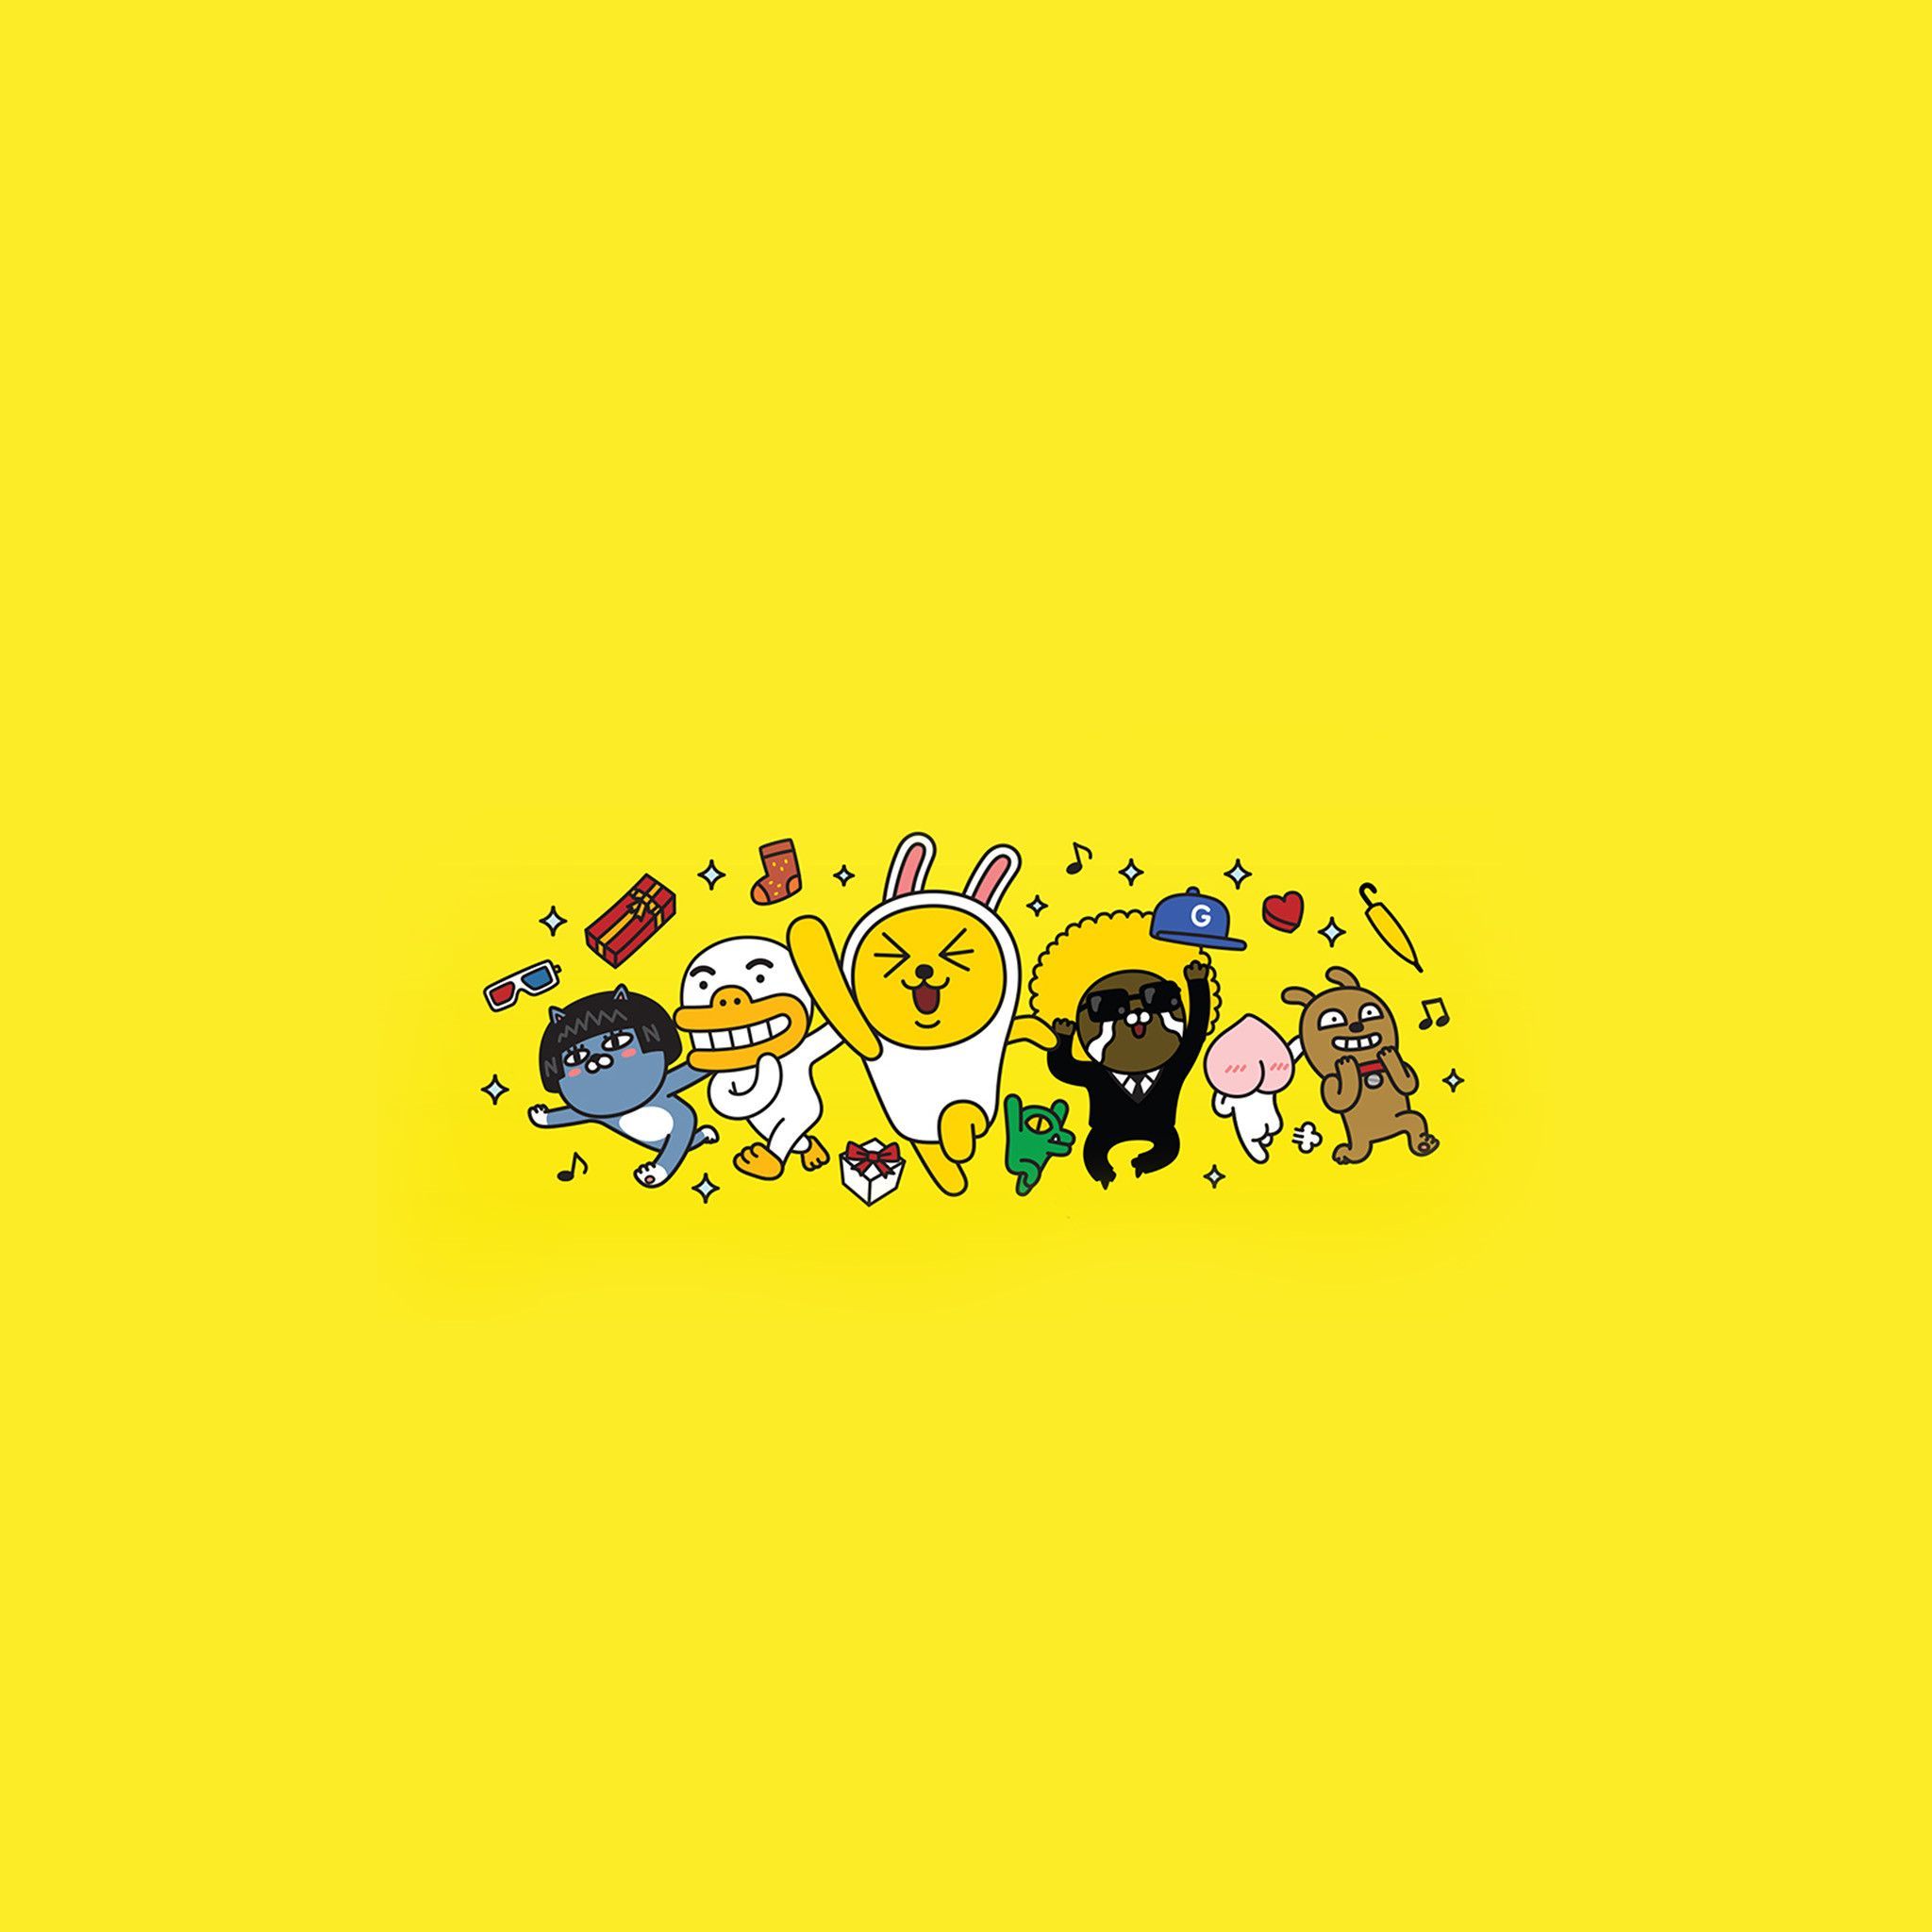 A yellow wallpaper featuring the six main Kakao friends characters, BROWN, PINK,CONY, RYAN, LUCY and MANG. - Light yellow